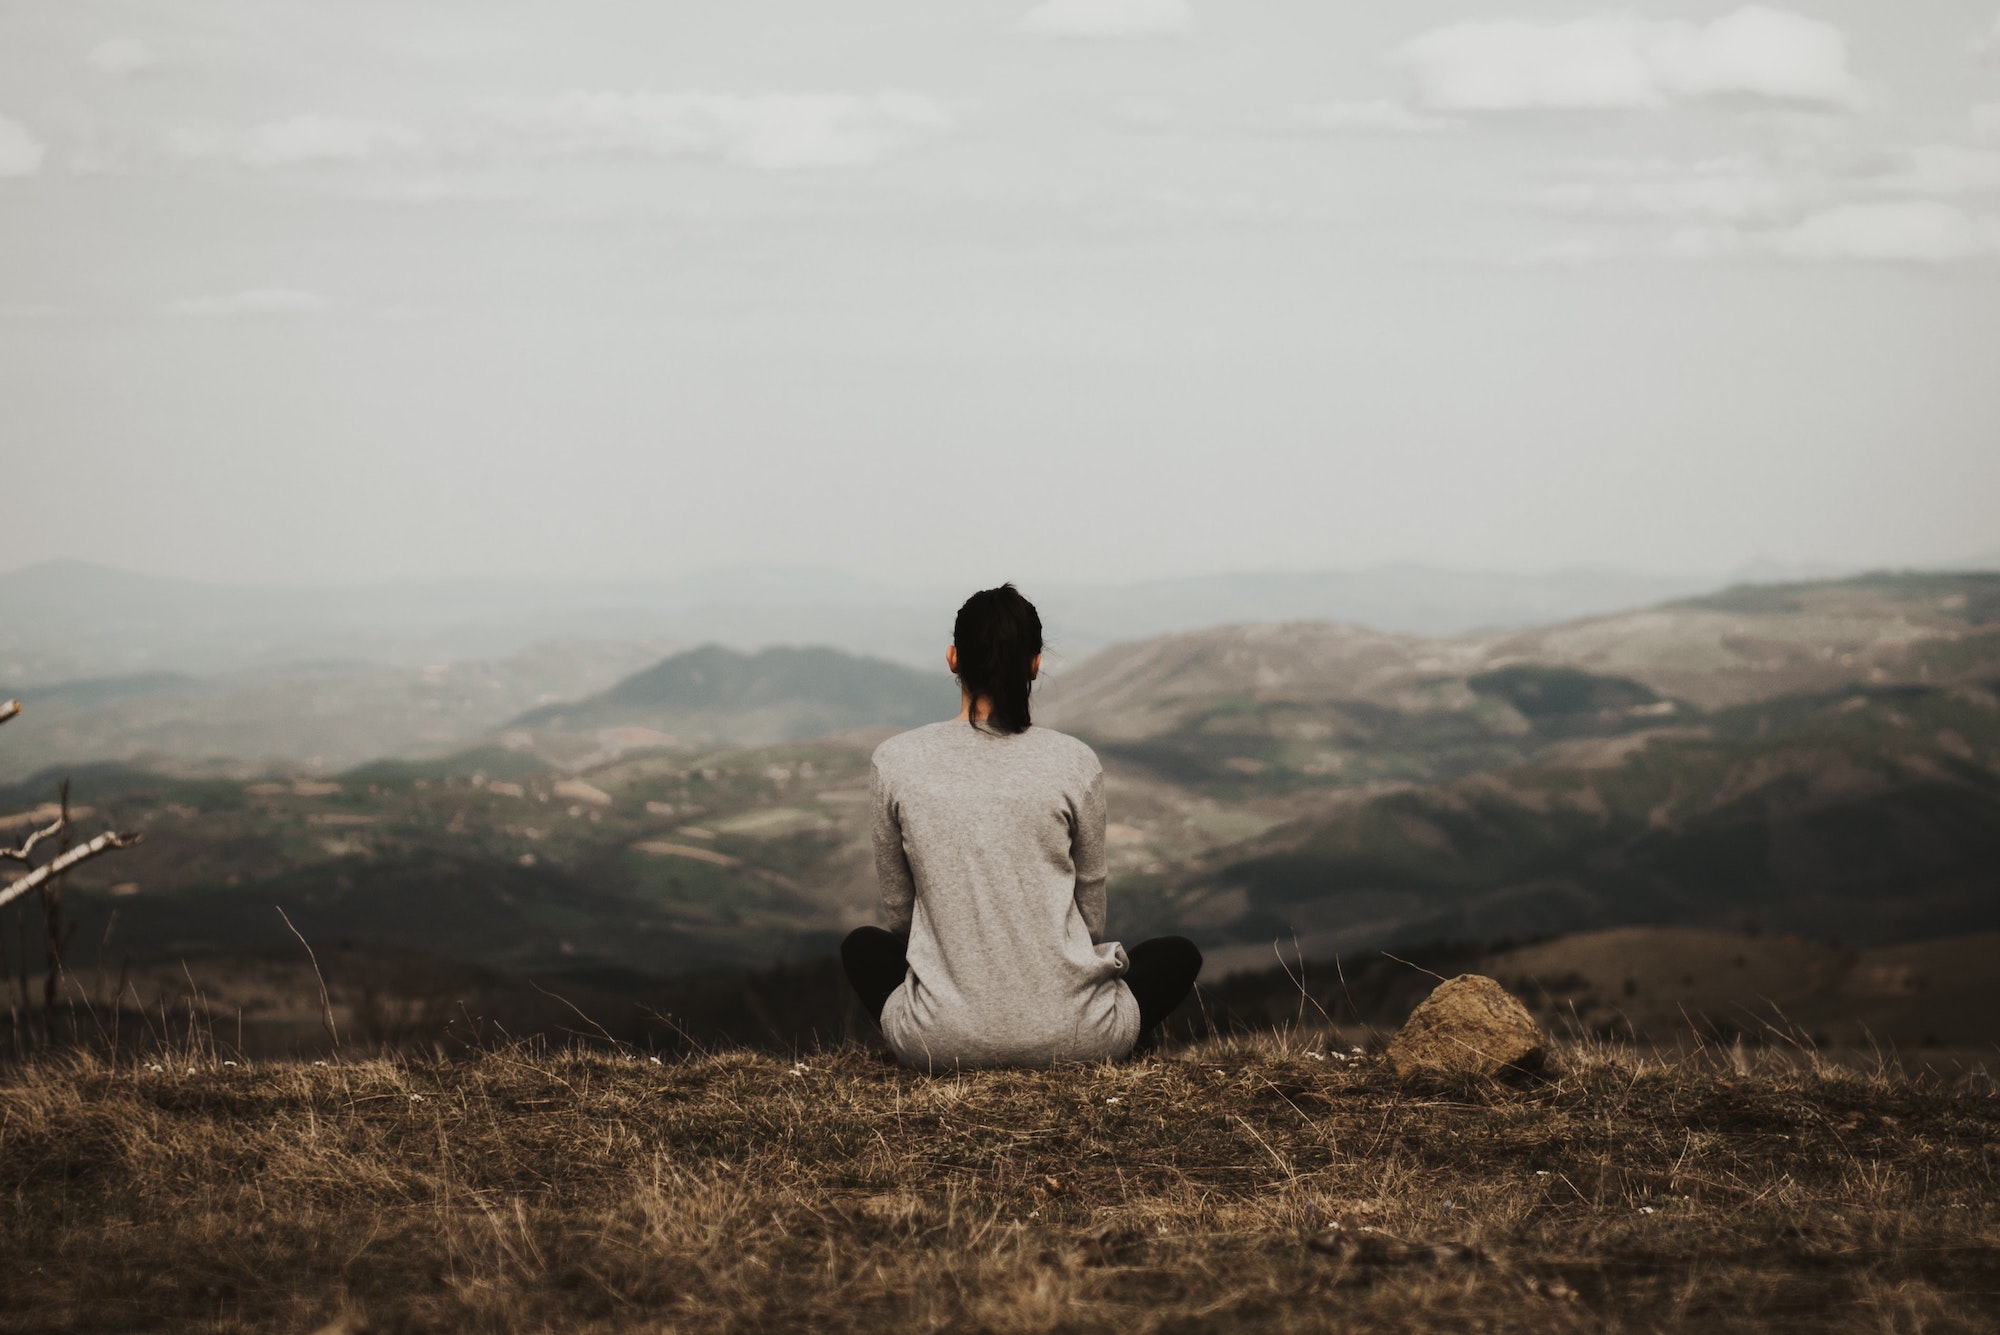 5 ways to use mindfulness during and after a crisis